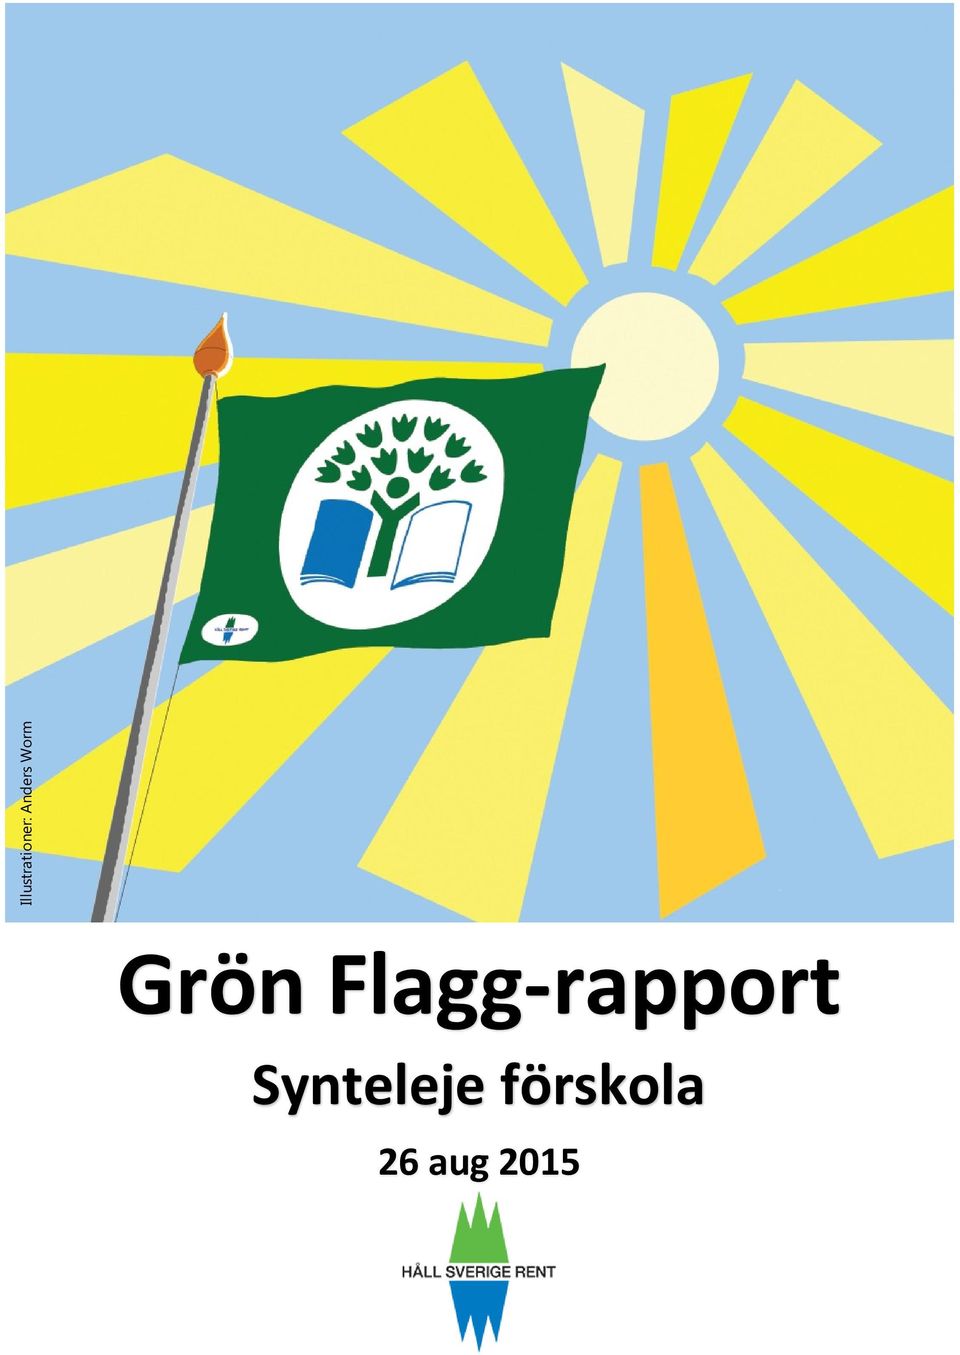 Flagg-rapport